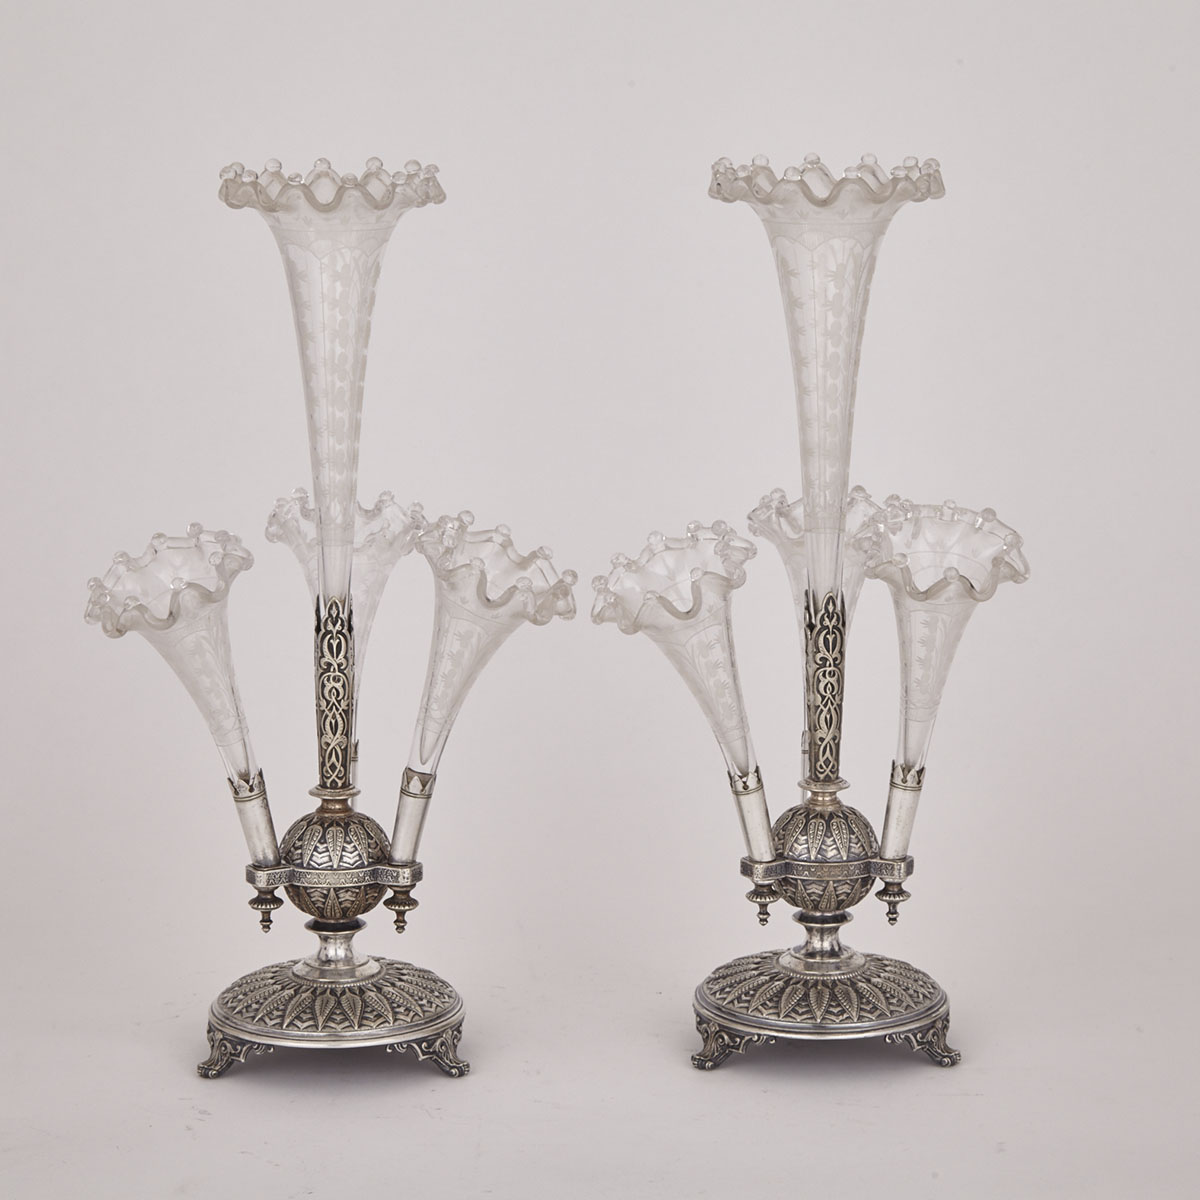 Pair of Victorian Egyptian Revival Silver Plate and Etched Glass Epergnes, probably Henry Wilkinson & Co., c.1880